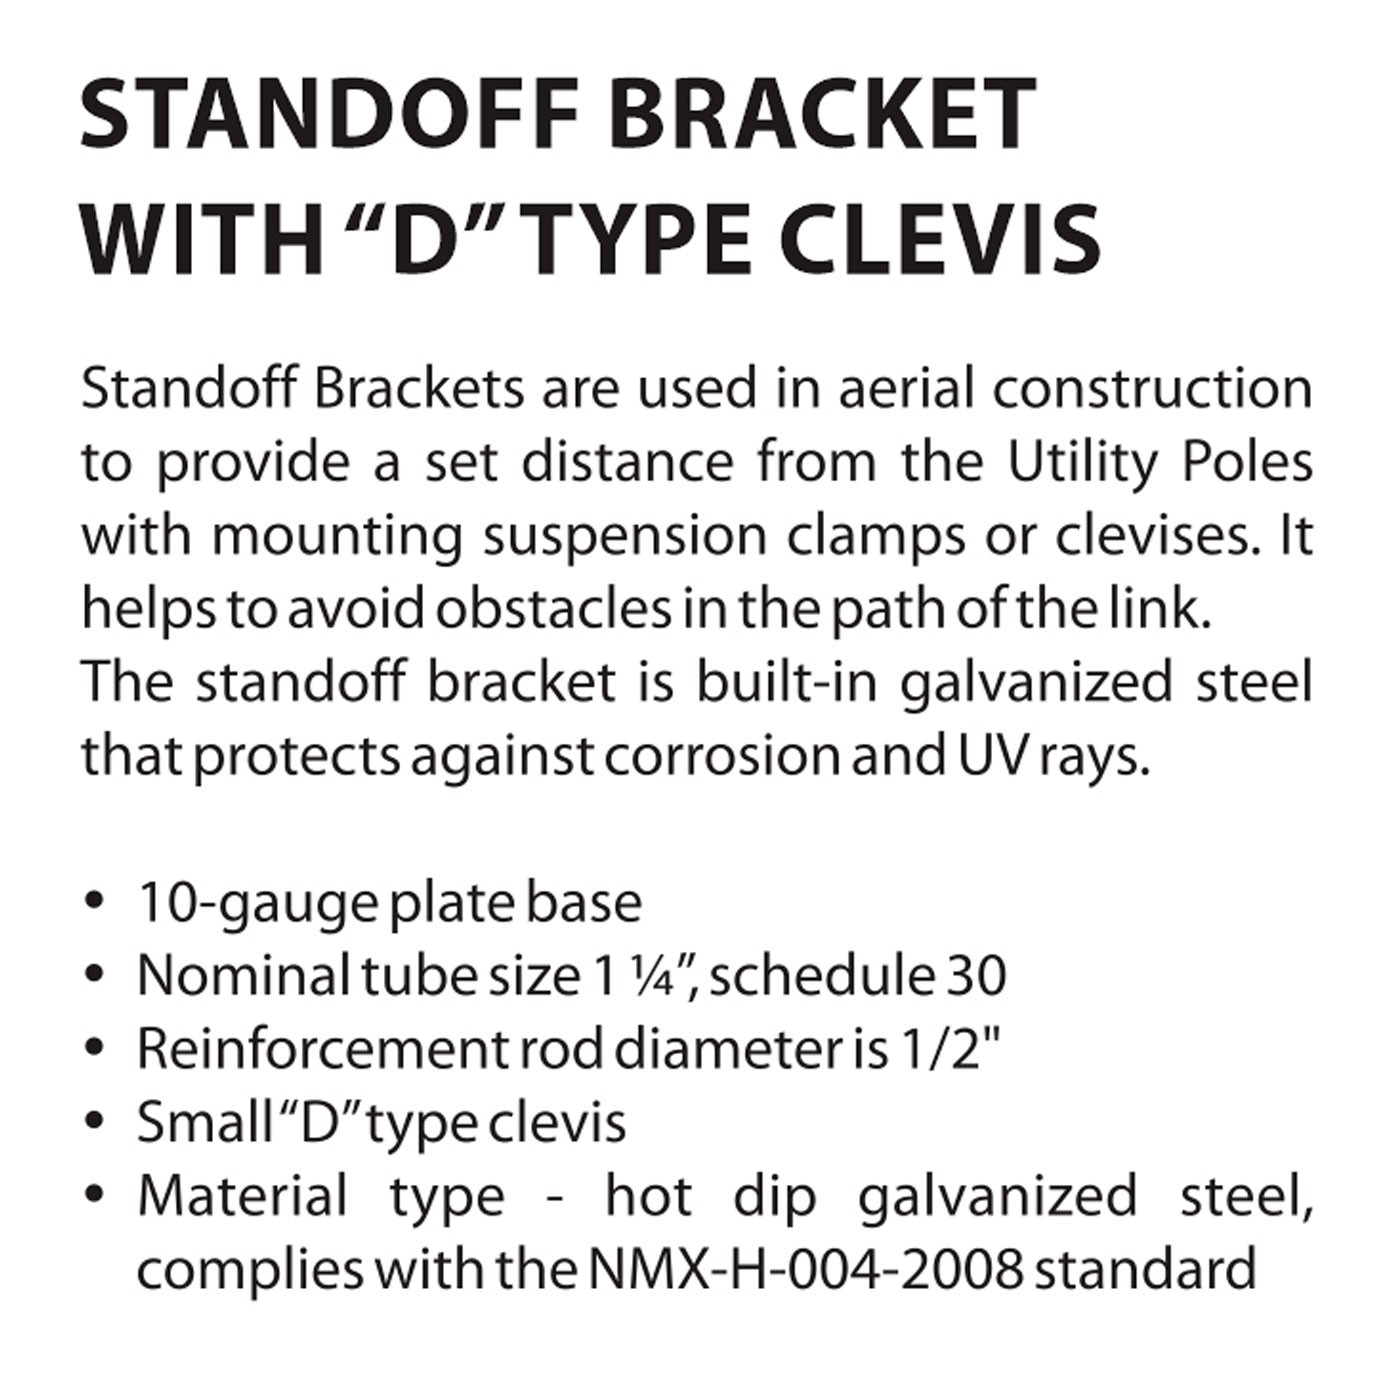 STANDOFF BRACKET WITH “D” TYPE CLEVIS